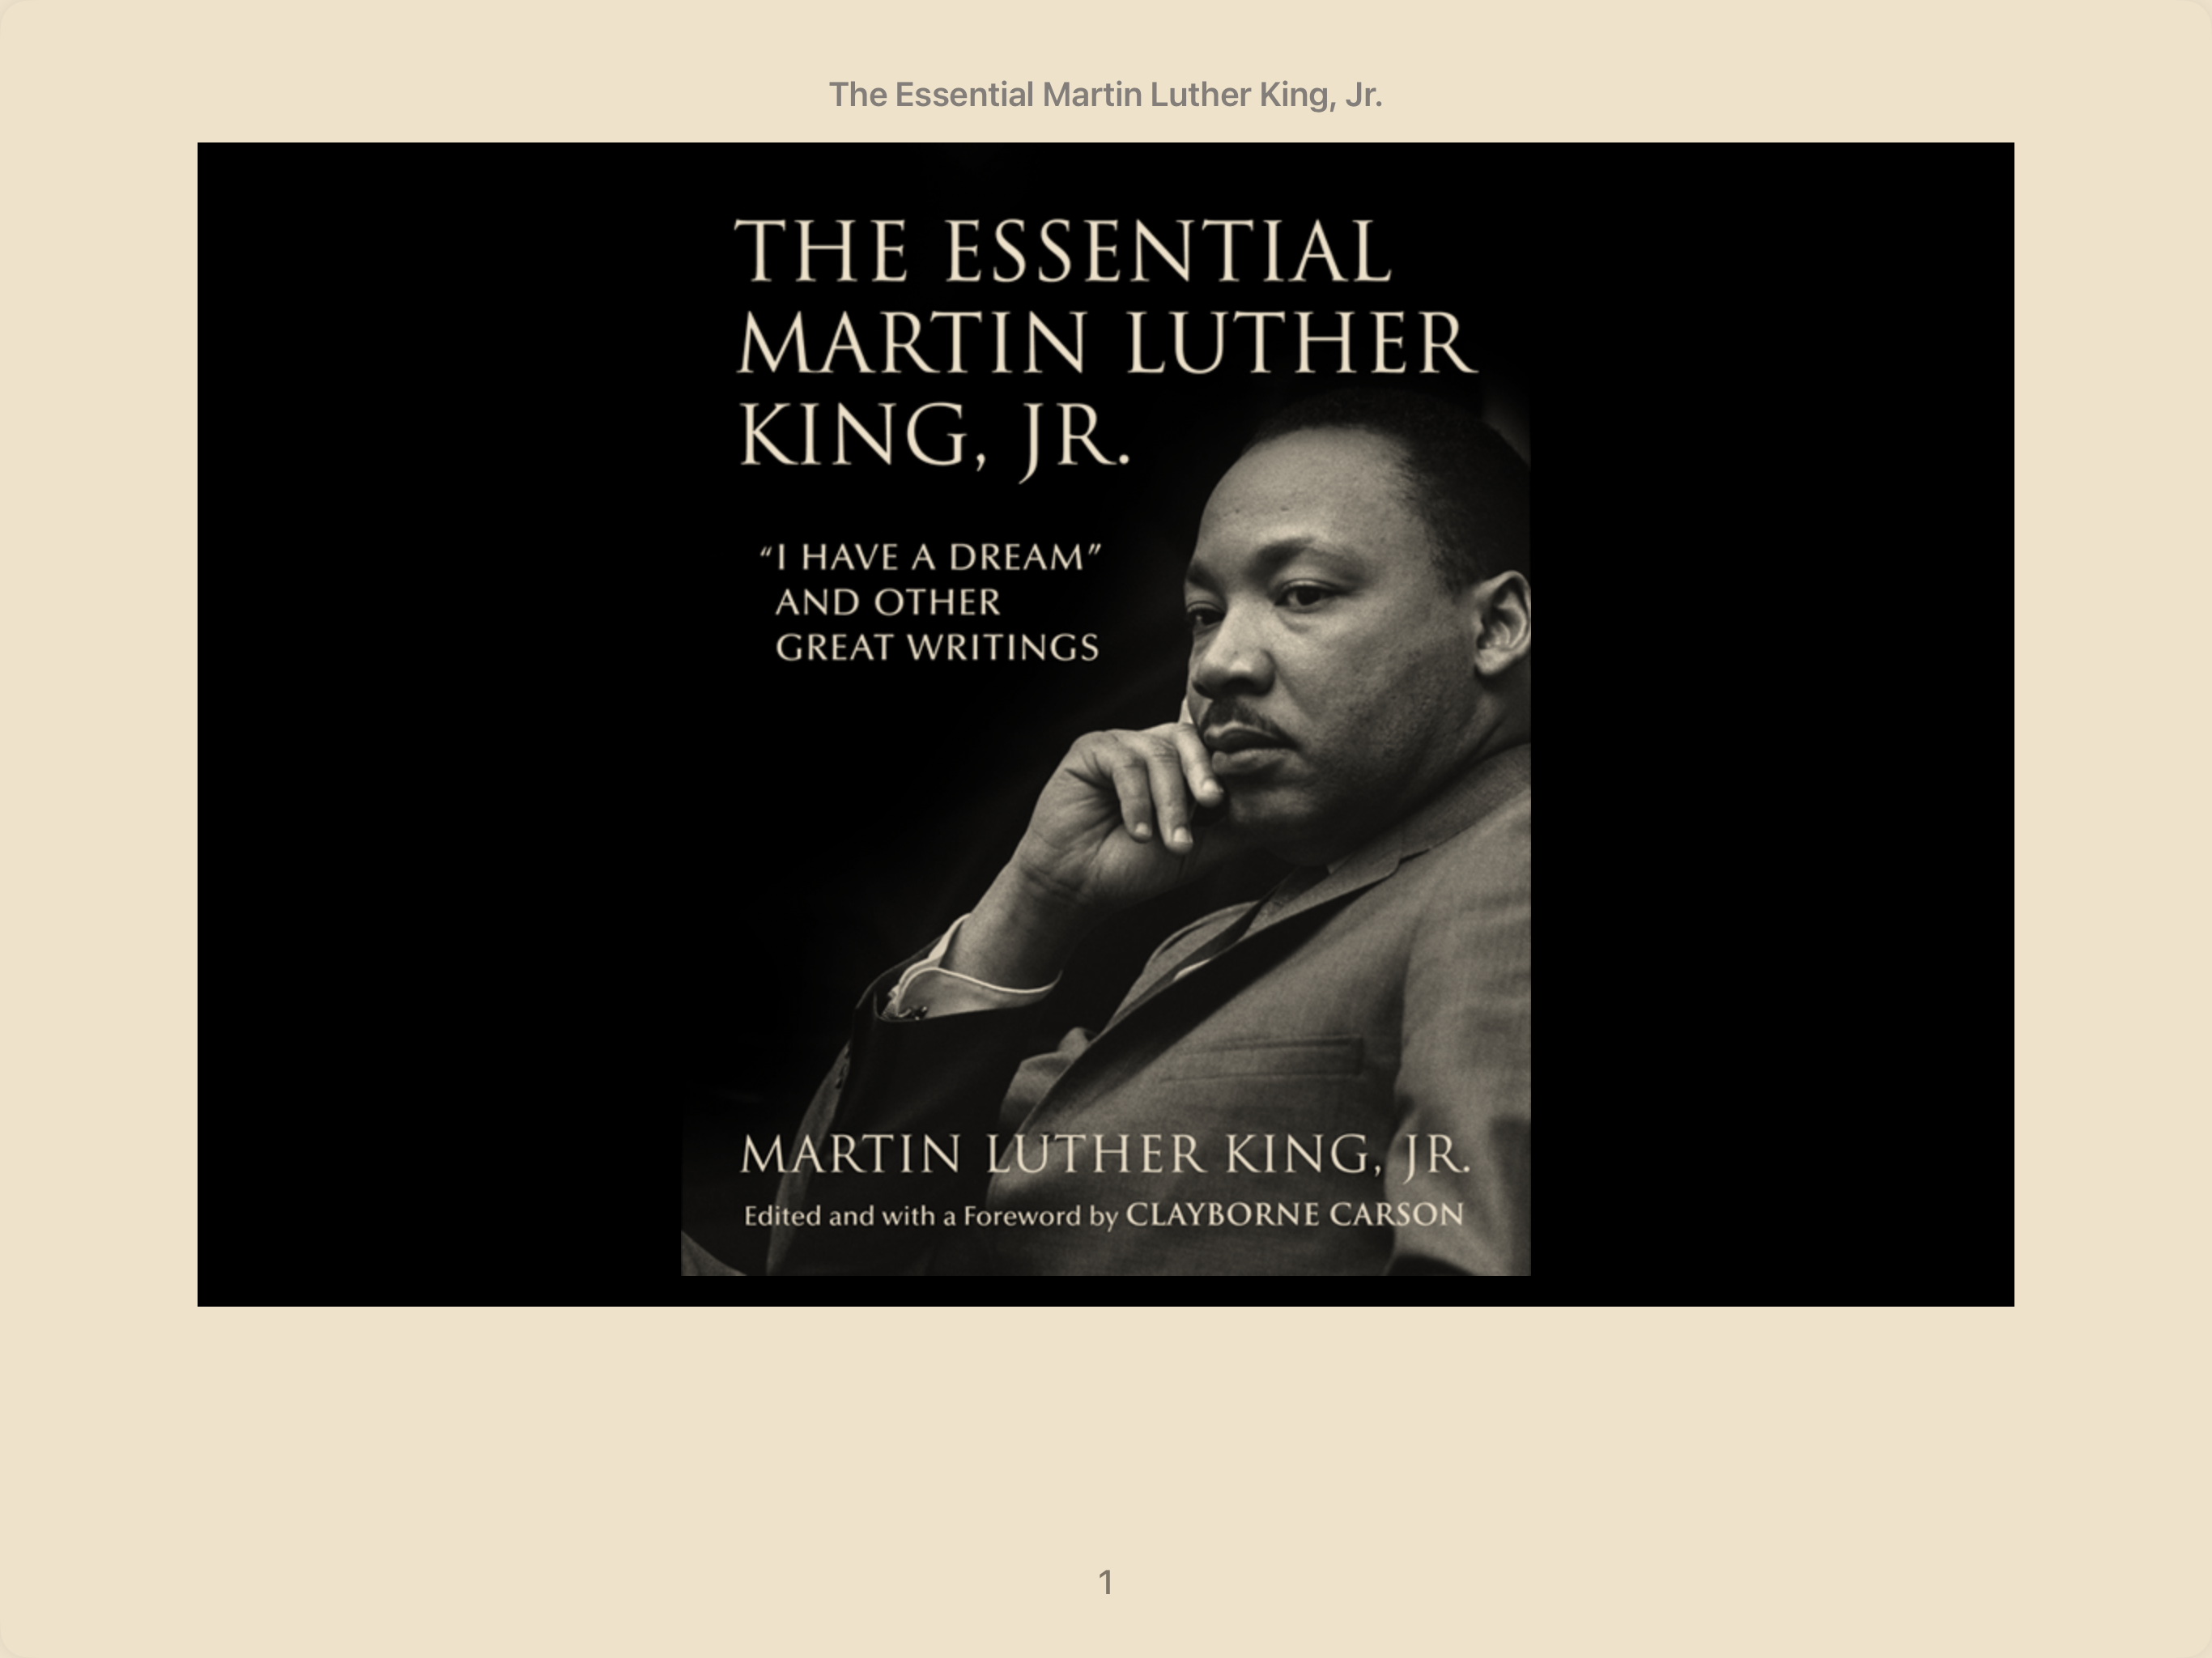 Book cover of “The Essential Martin Luther King Jr.”